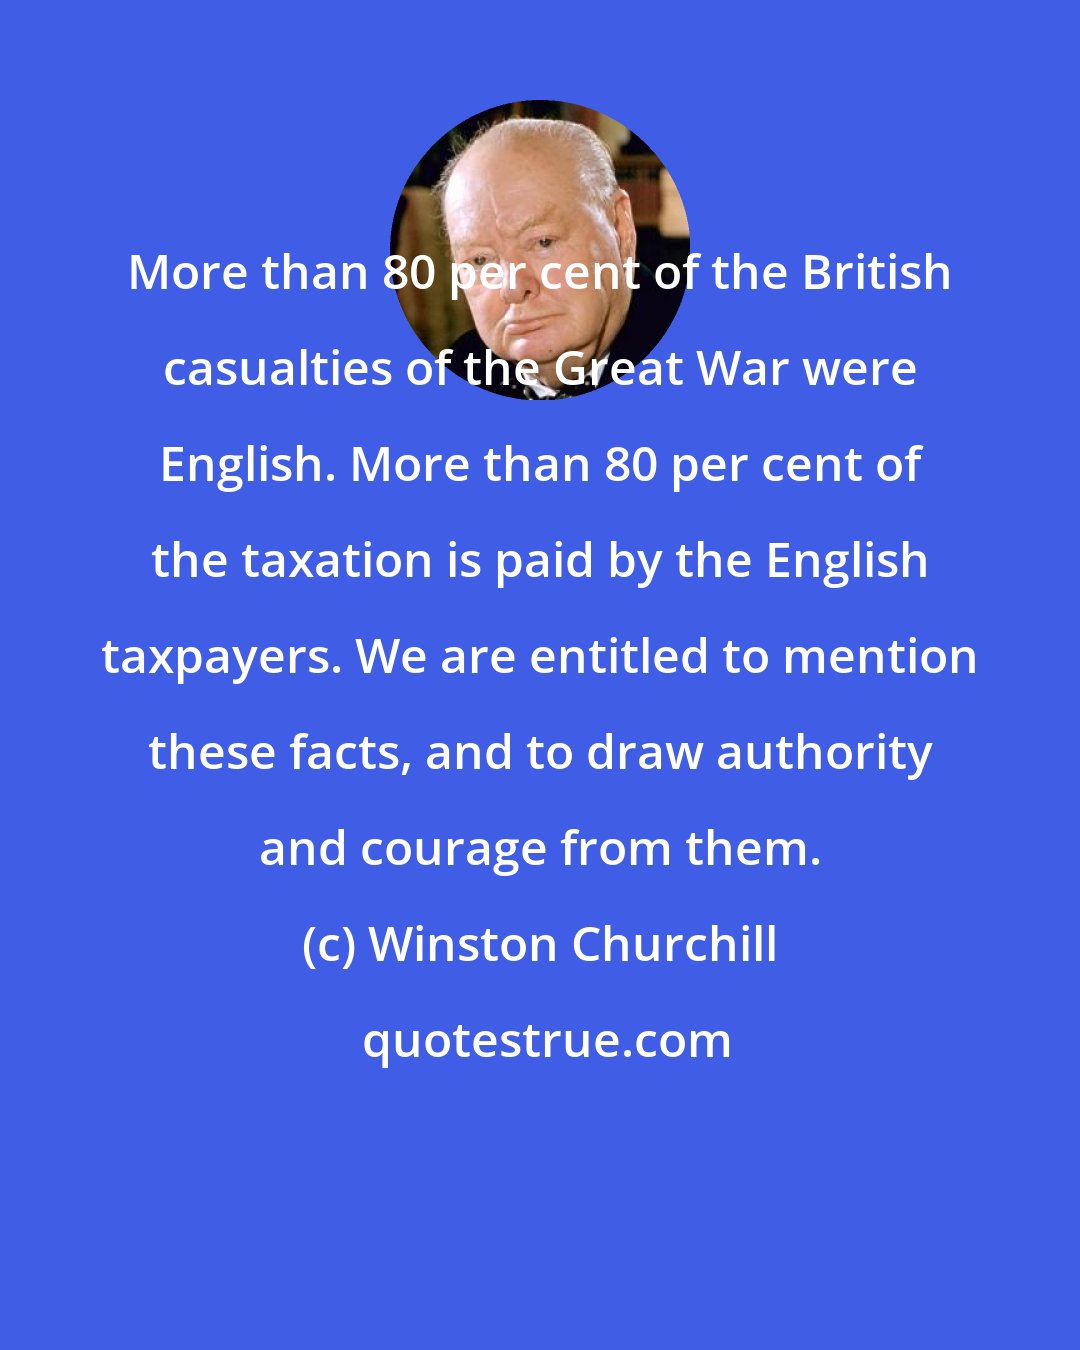 Winston Churchill: More than 80 per cent of the British casualties of the Great War were English. More than 80 per cent of the taxation is paid by the English taxpayers. We are entitled to mention these facts, and to draw authority and courage from them.